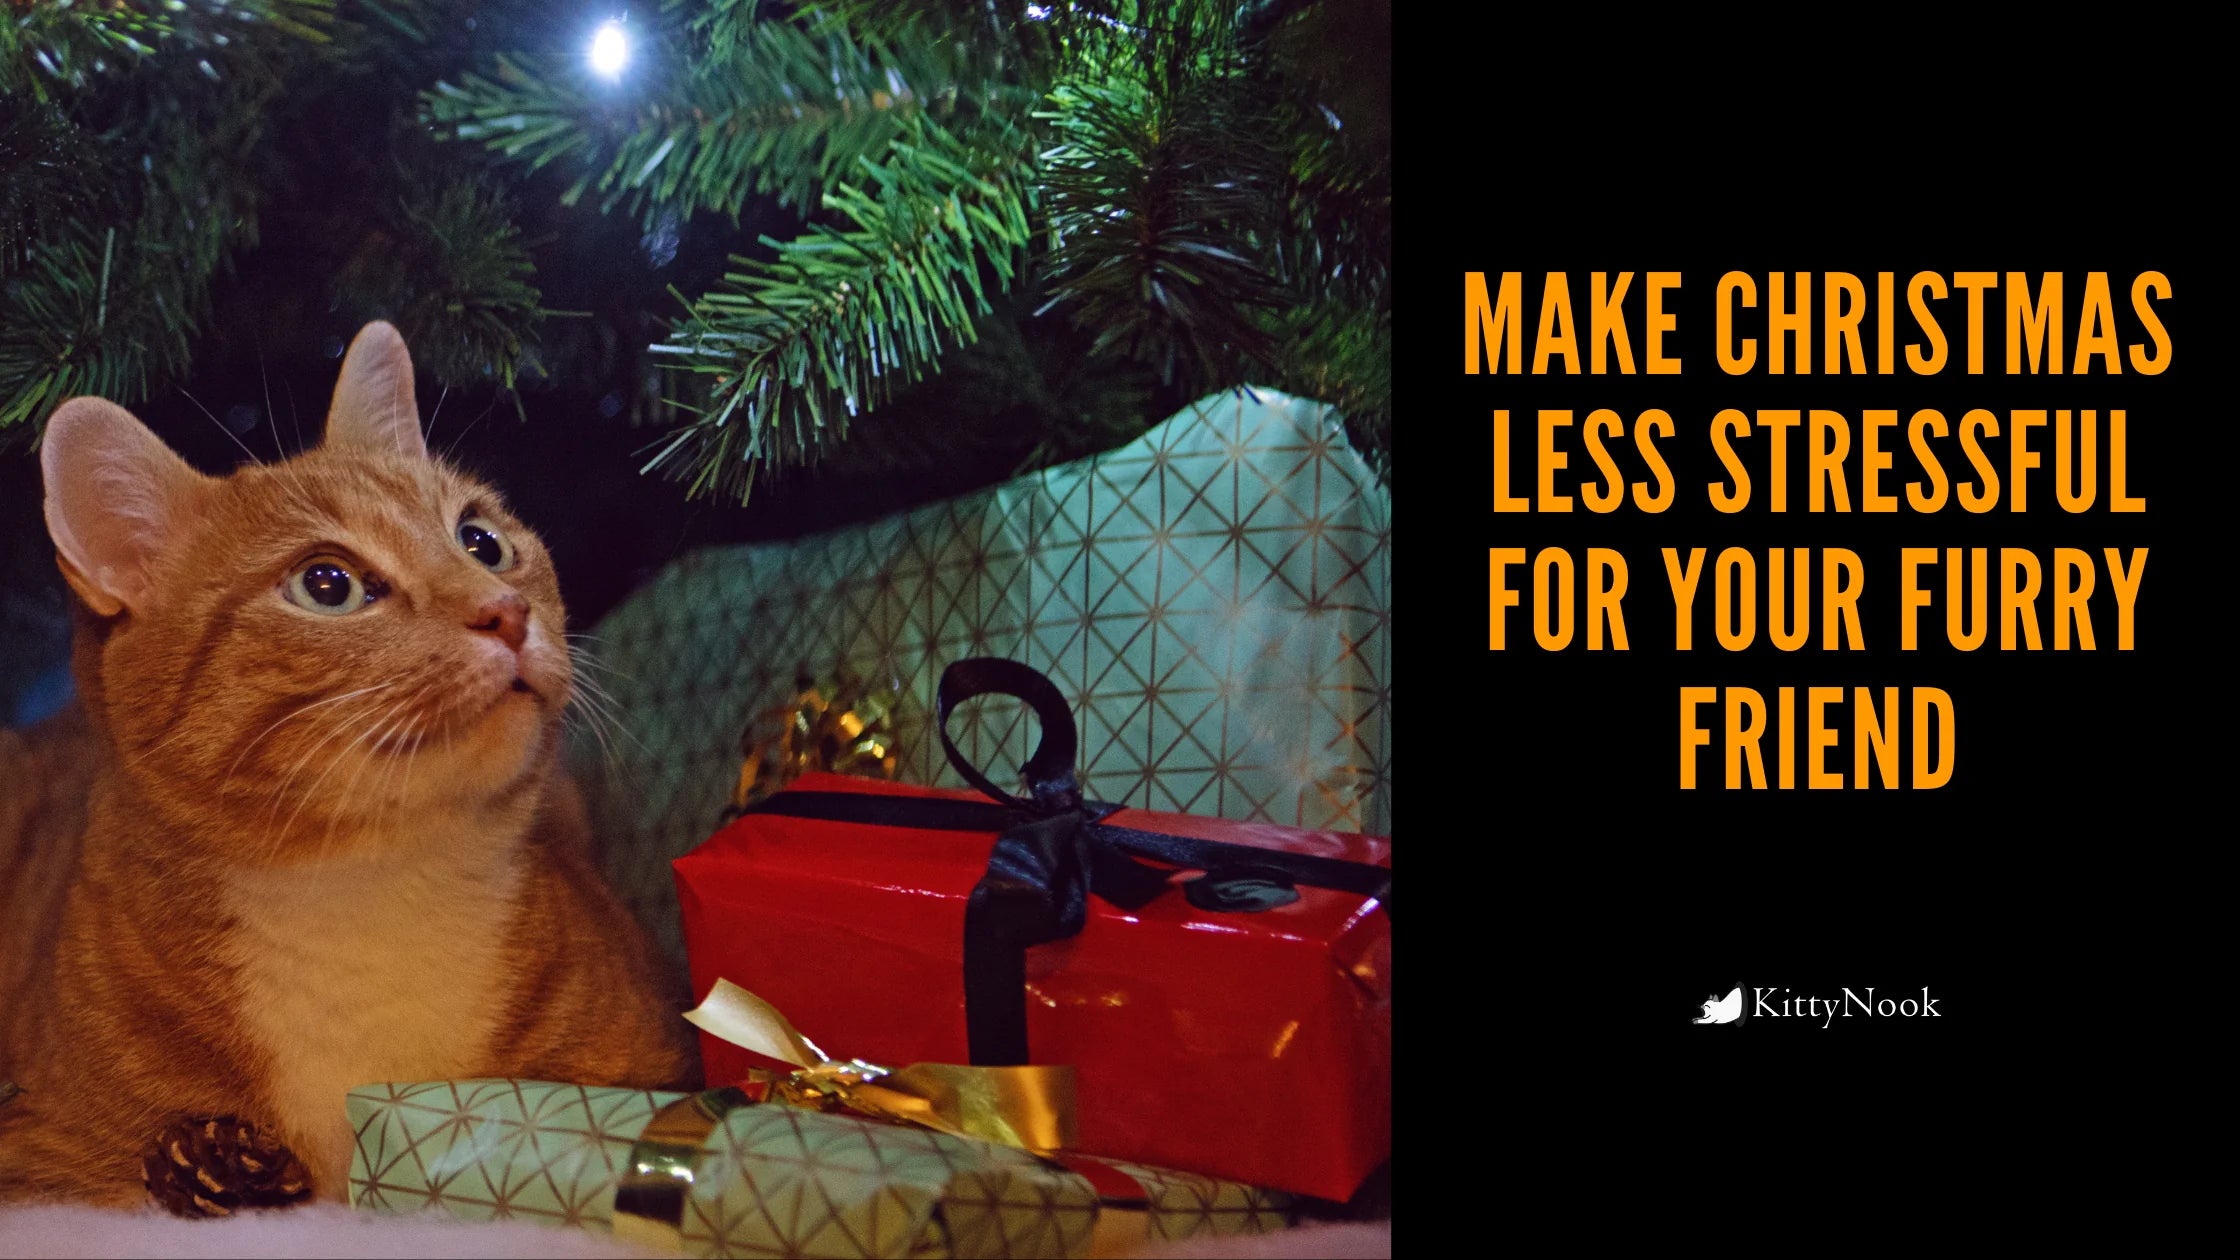 Make Christmas Less Stressful For Your Furry Friend - KittyNook Cat Company